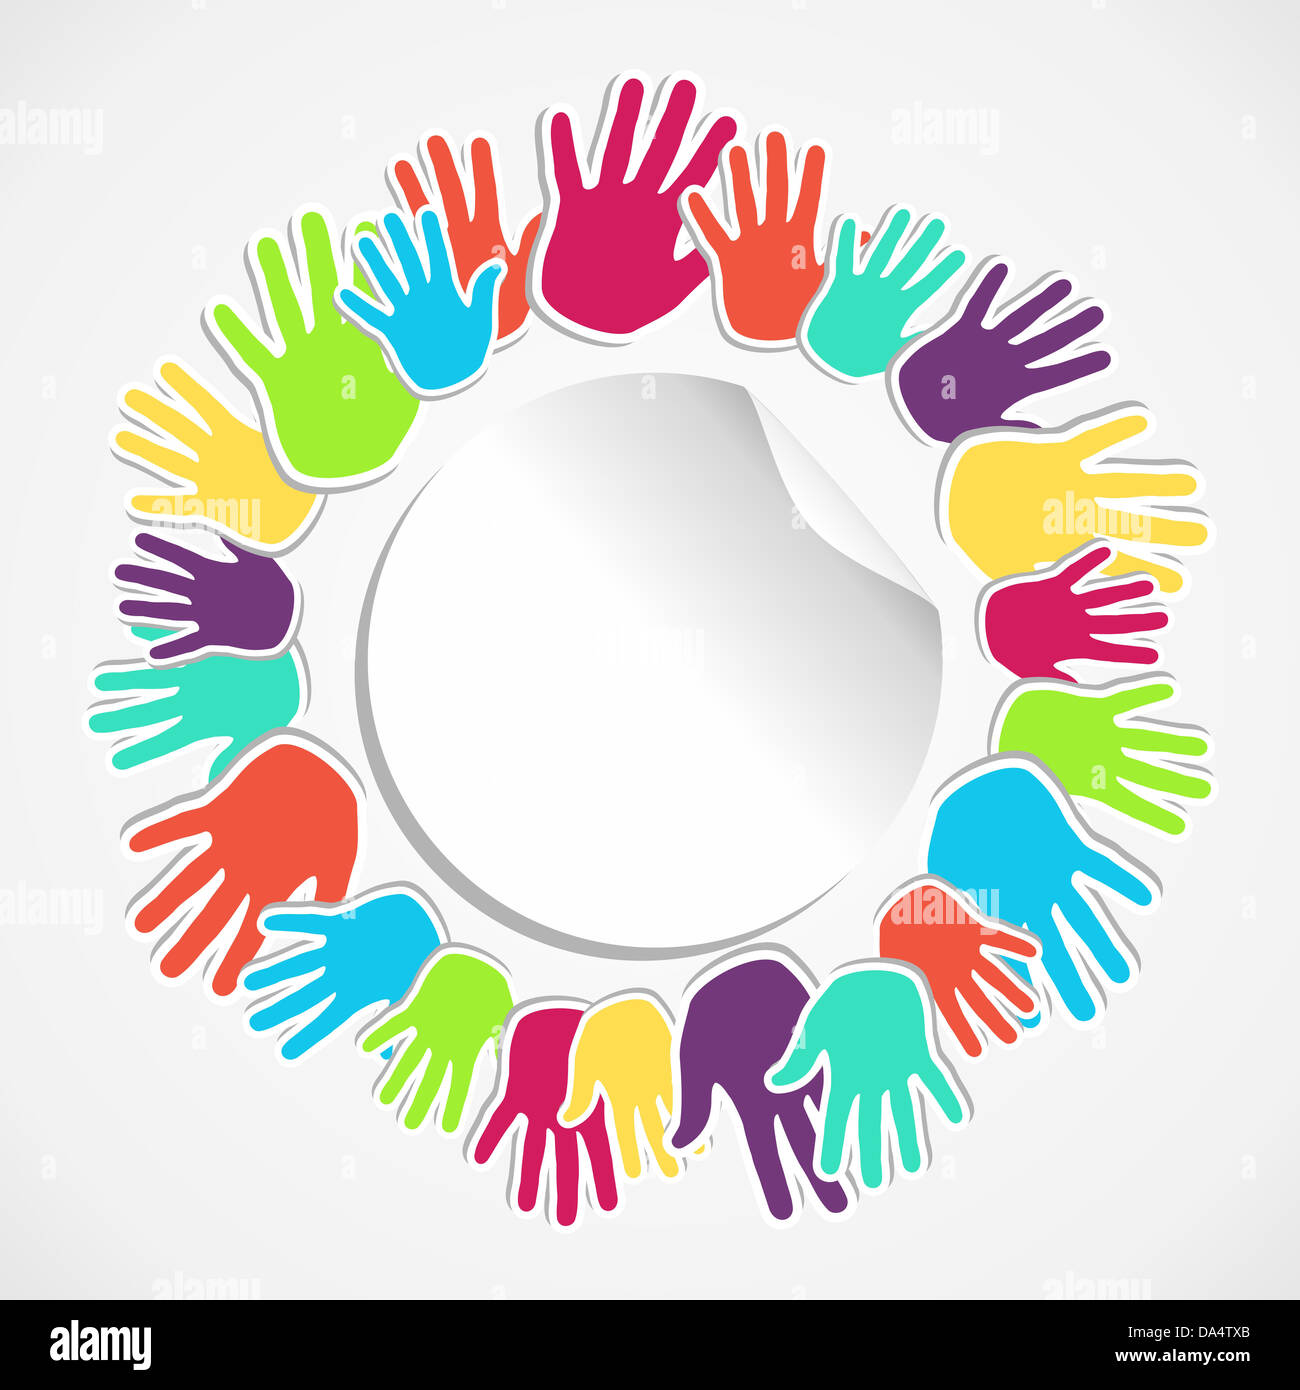 People hands connected icon concept illustration background. Vector file layered for easy manipulation and custom coloring. Stock Photo